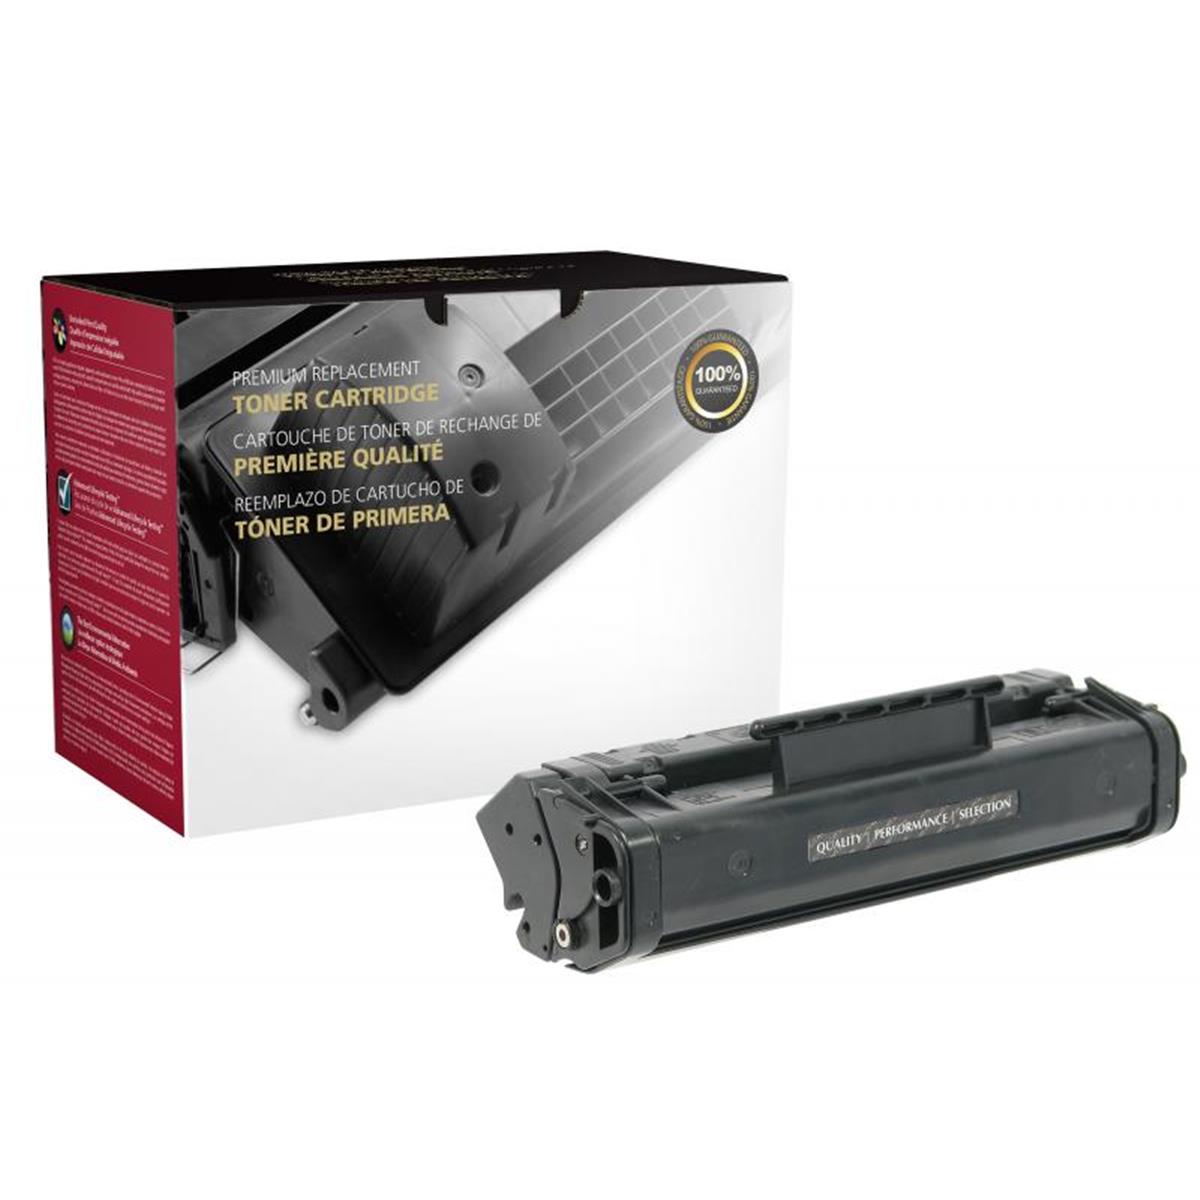 Picture of Canon 200019 Toner Cartridge for 1557A002BA-FX3